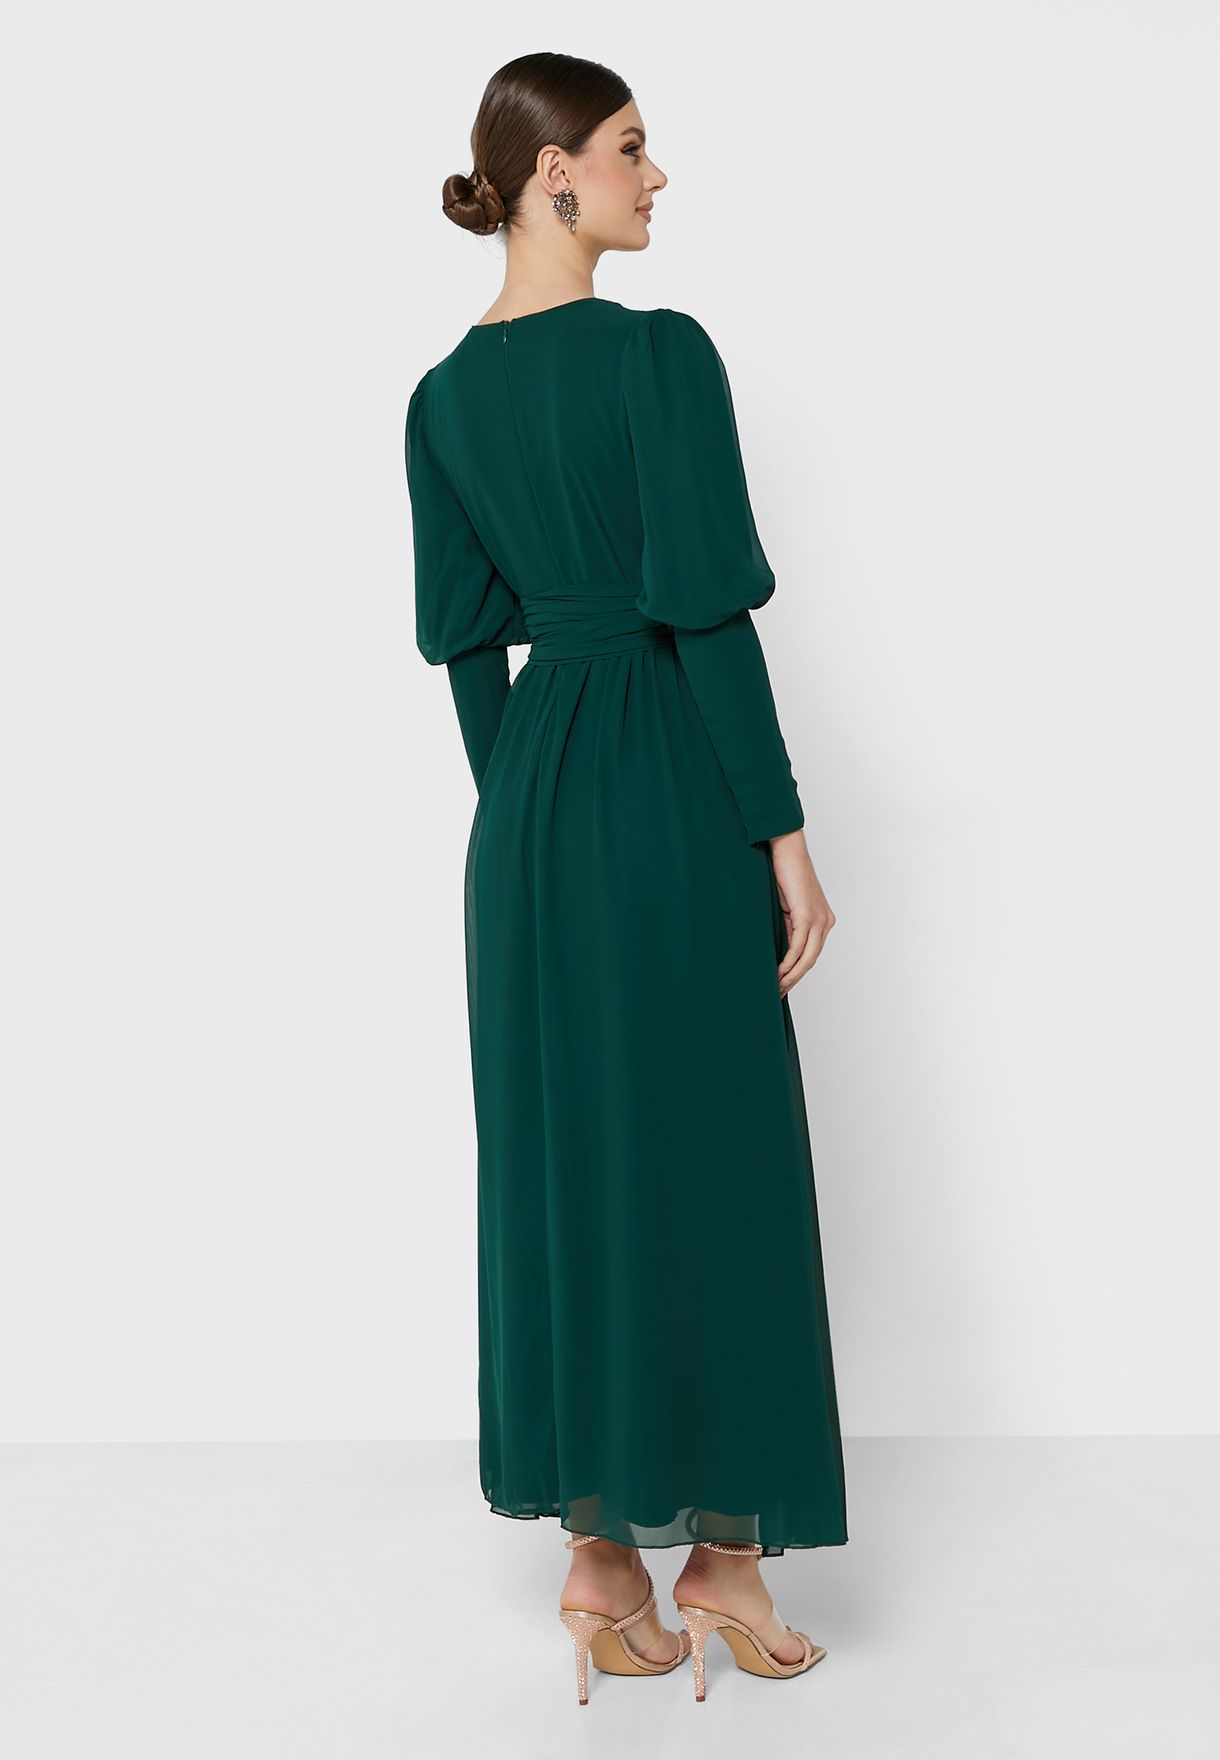 Mutton Sleeve Solid Dress